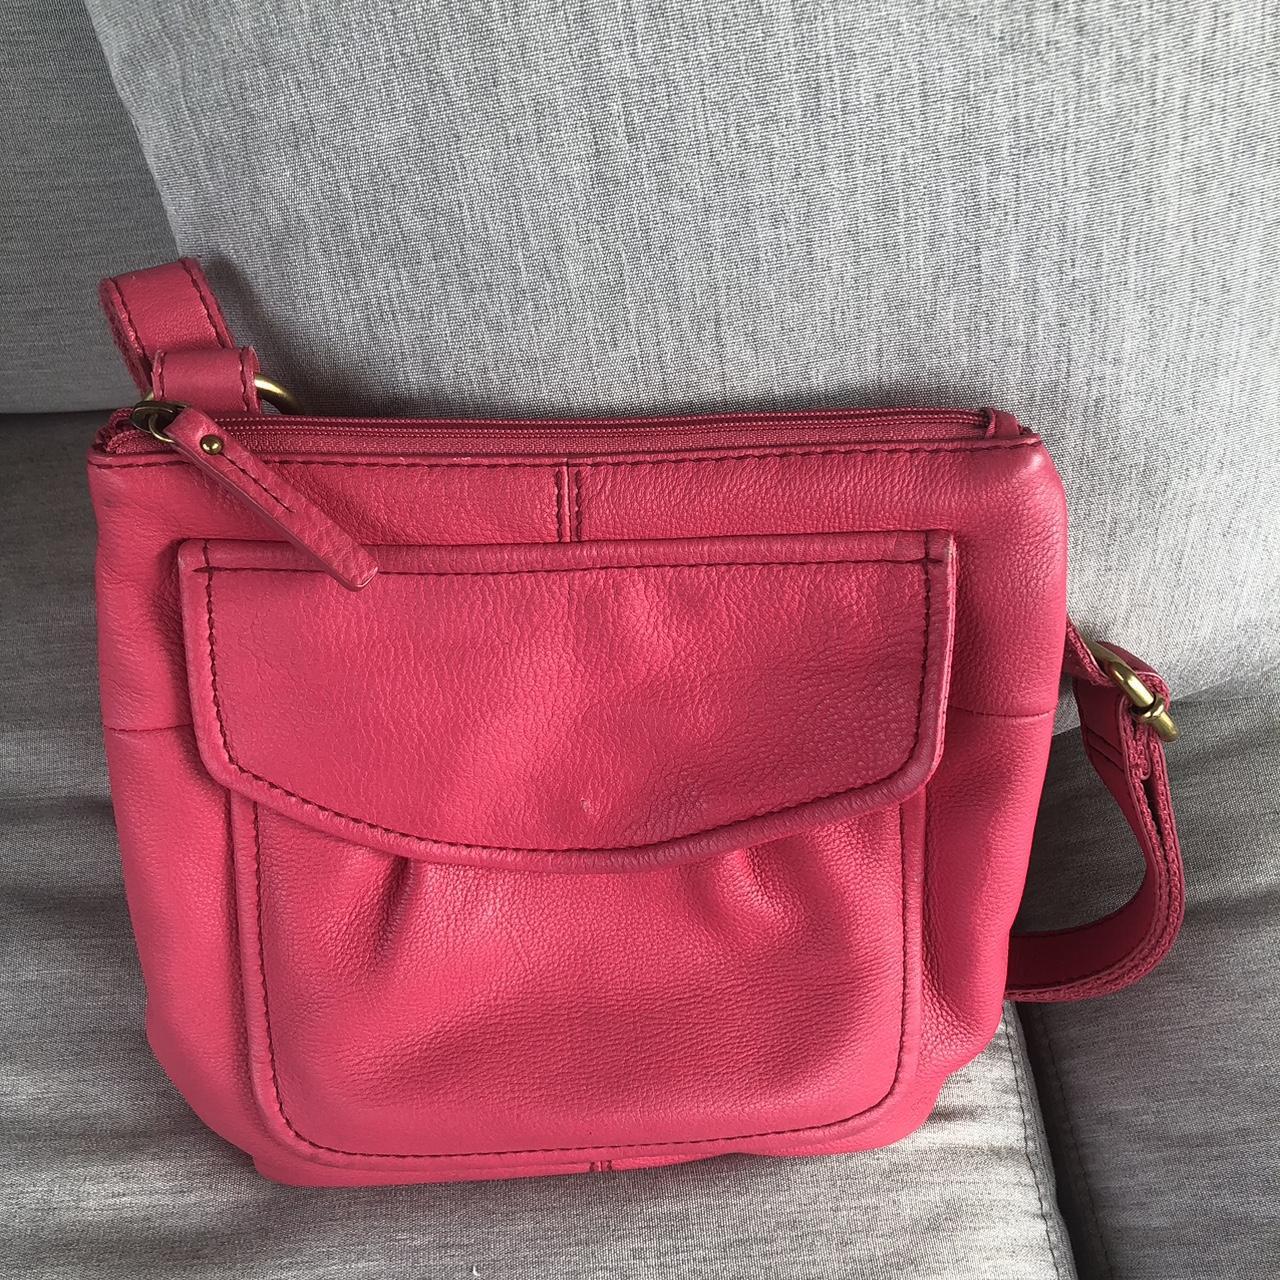 Fossil | Bags | Fossil Tote Bag Pink Red Large Purse Zip | Poshmark